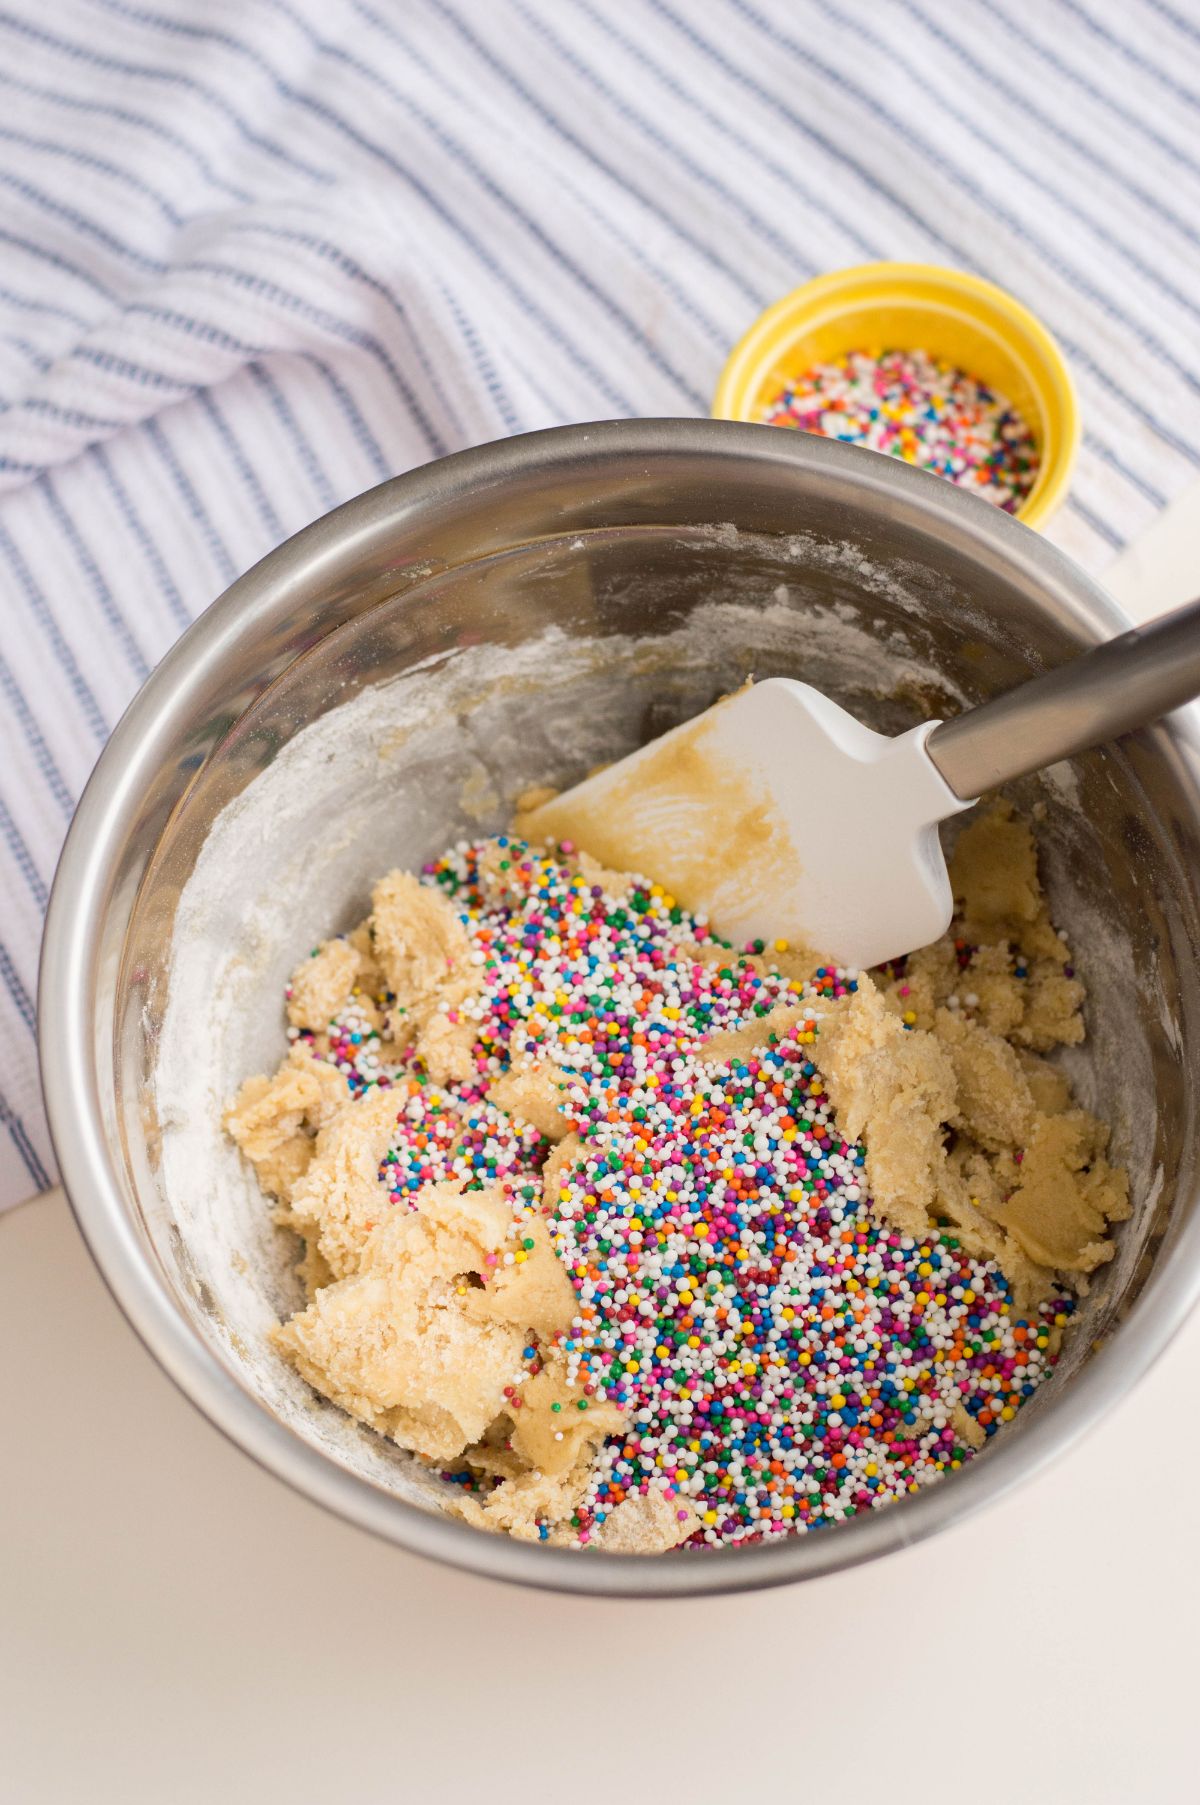 Sprinkles added on the dough mixture in a mixing bowl.